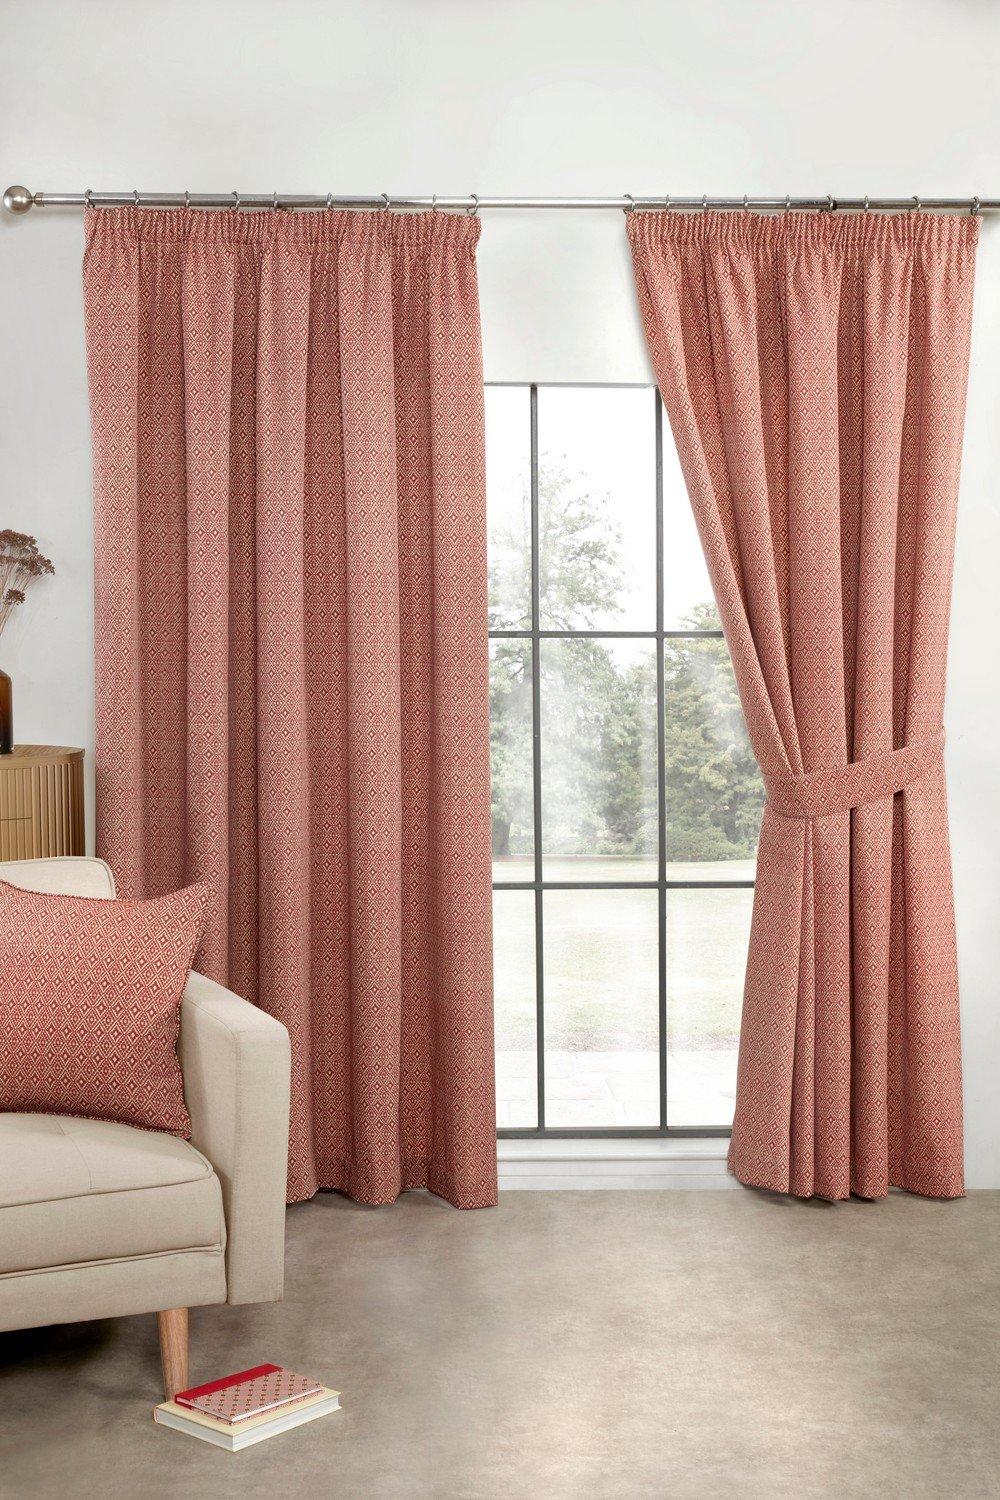 Aztec Pencil Pleat Fully Lined Ready Made Taped Top Curtain Pair